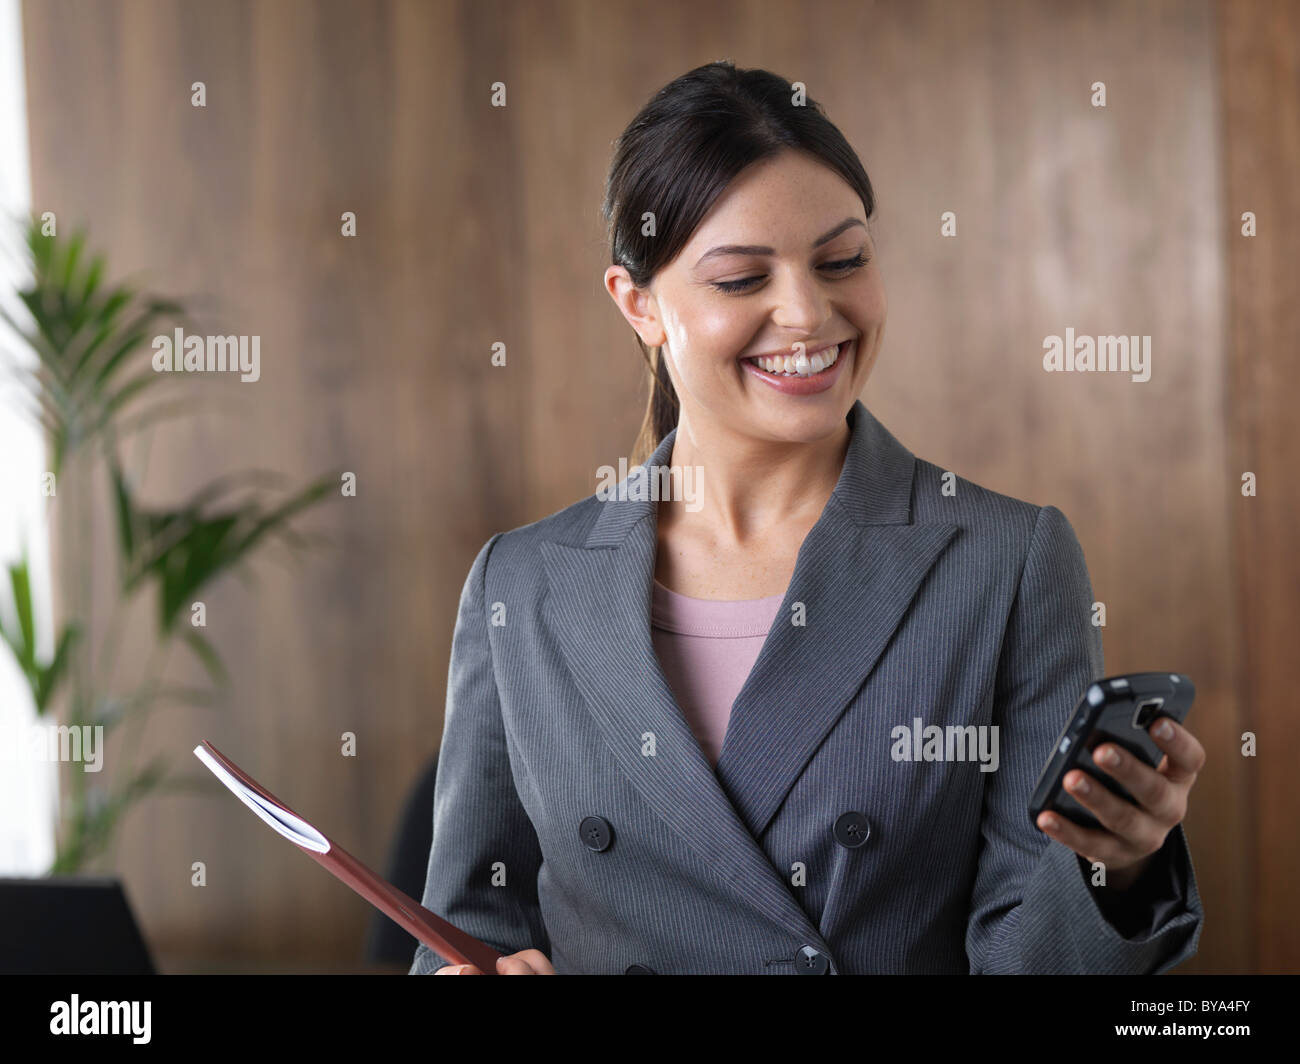 Business woman on the phone Stock Photo